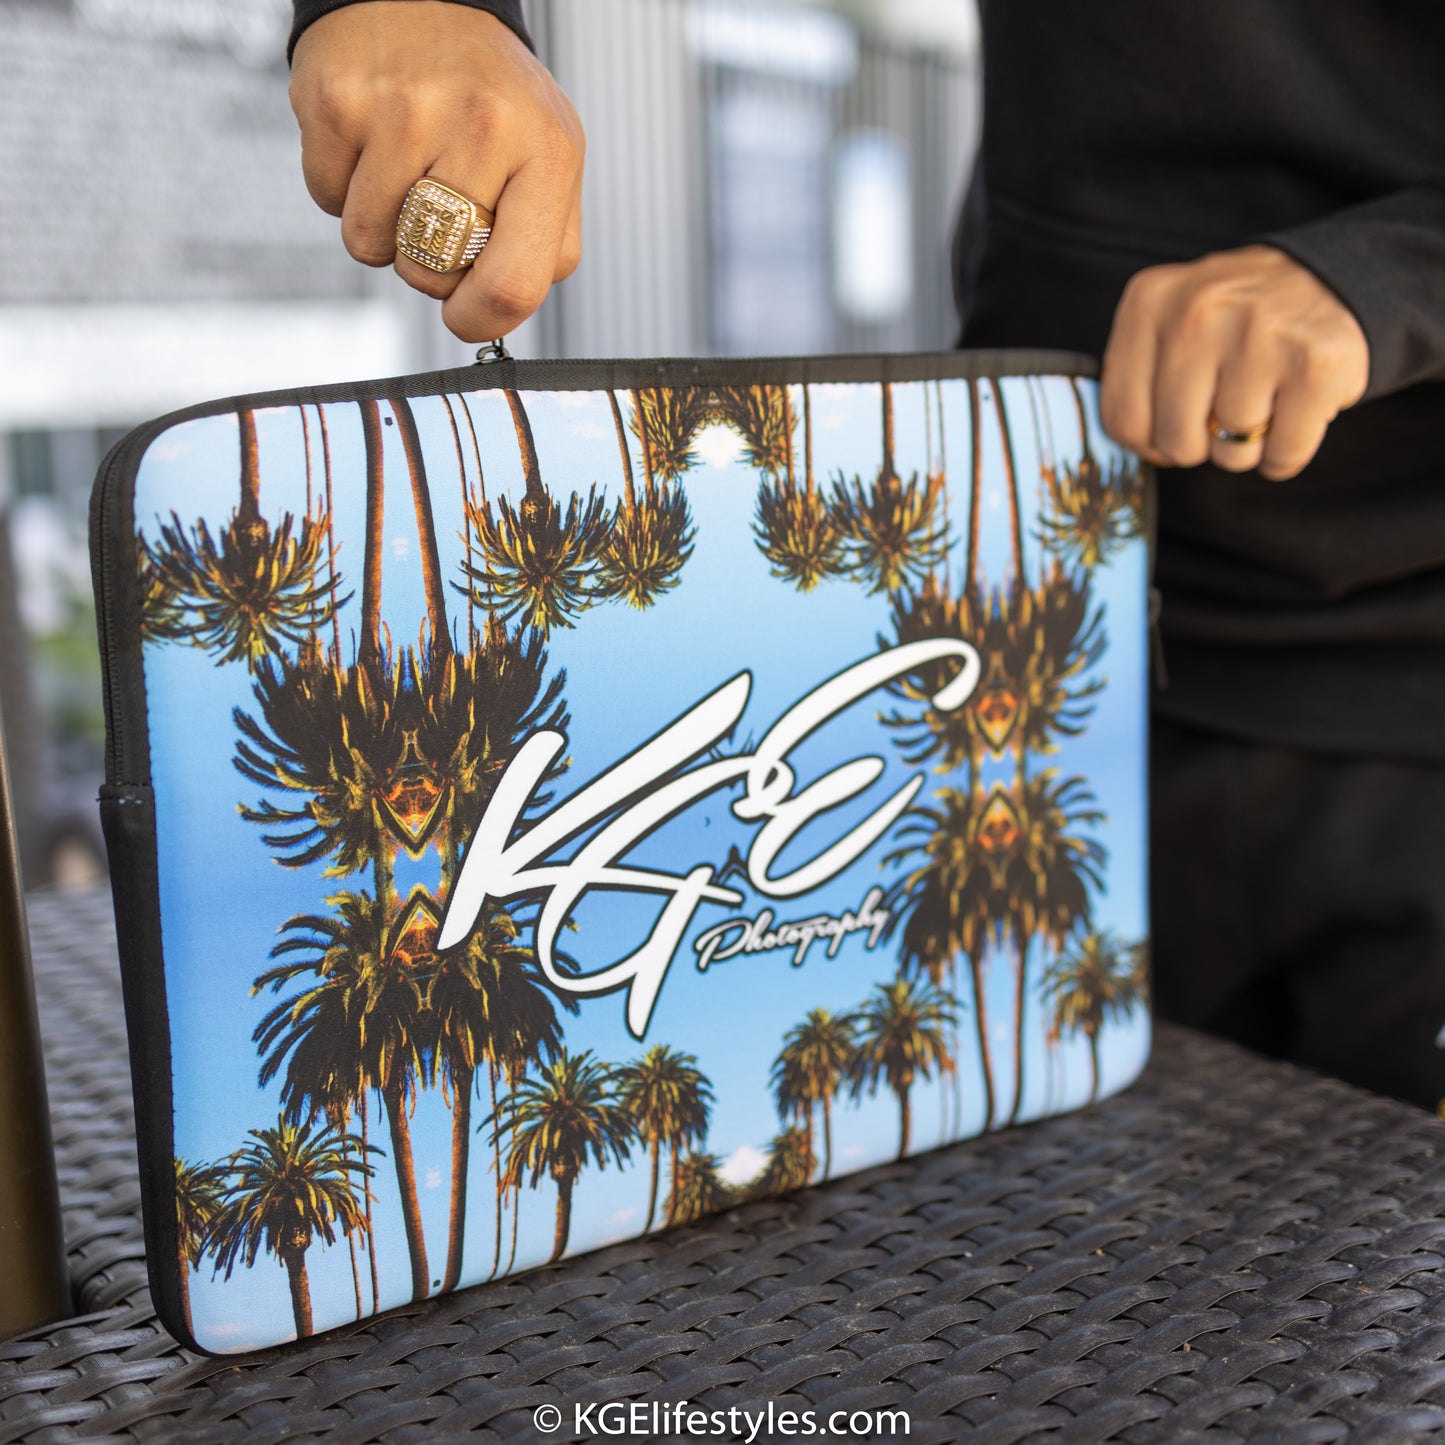 (New) KGE Photography - Designer Escape to Paradise Laptop Sleeve